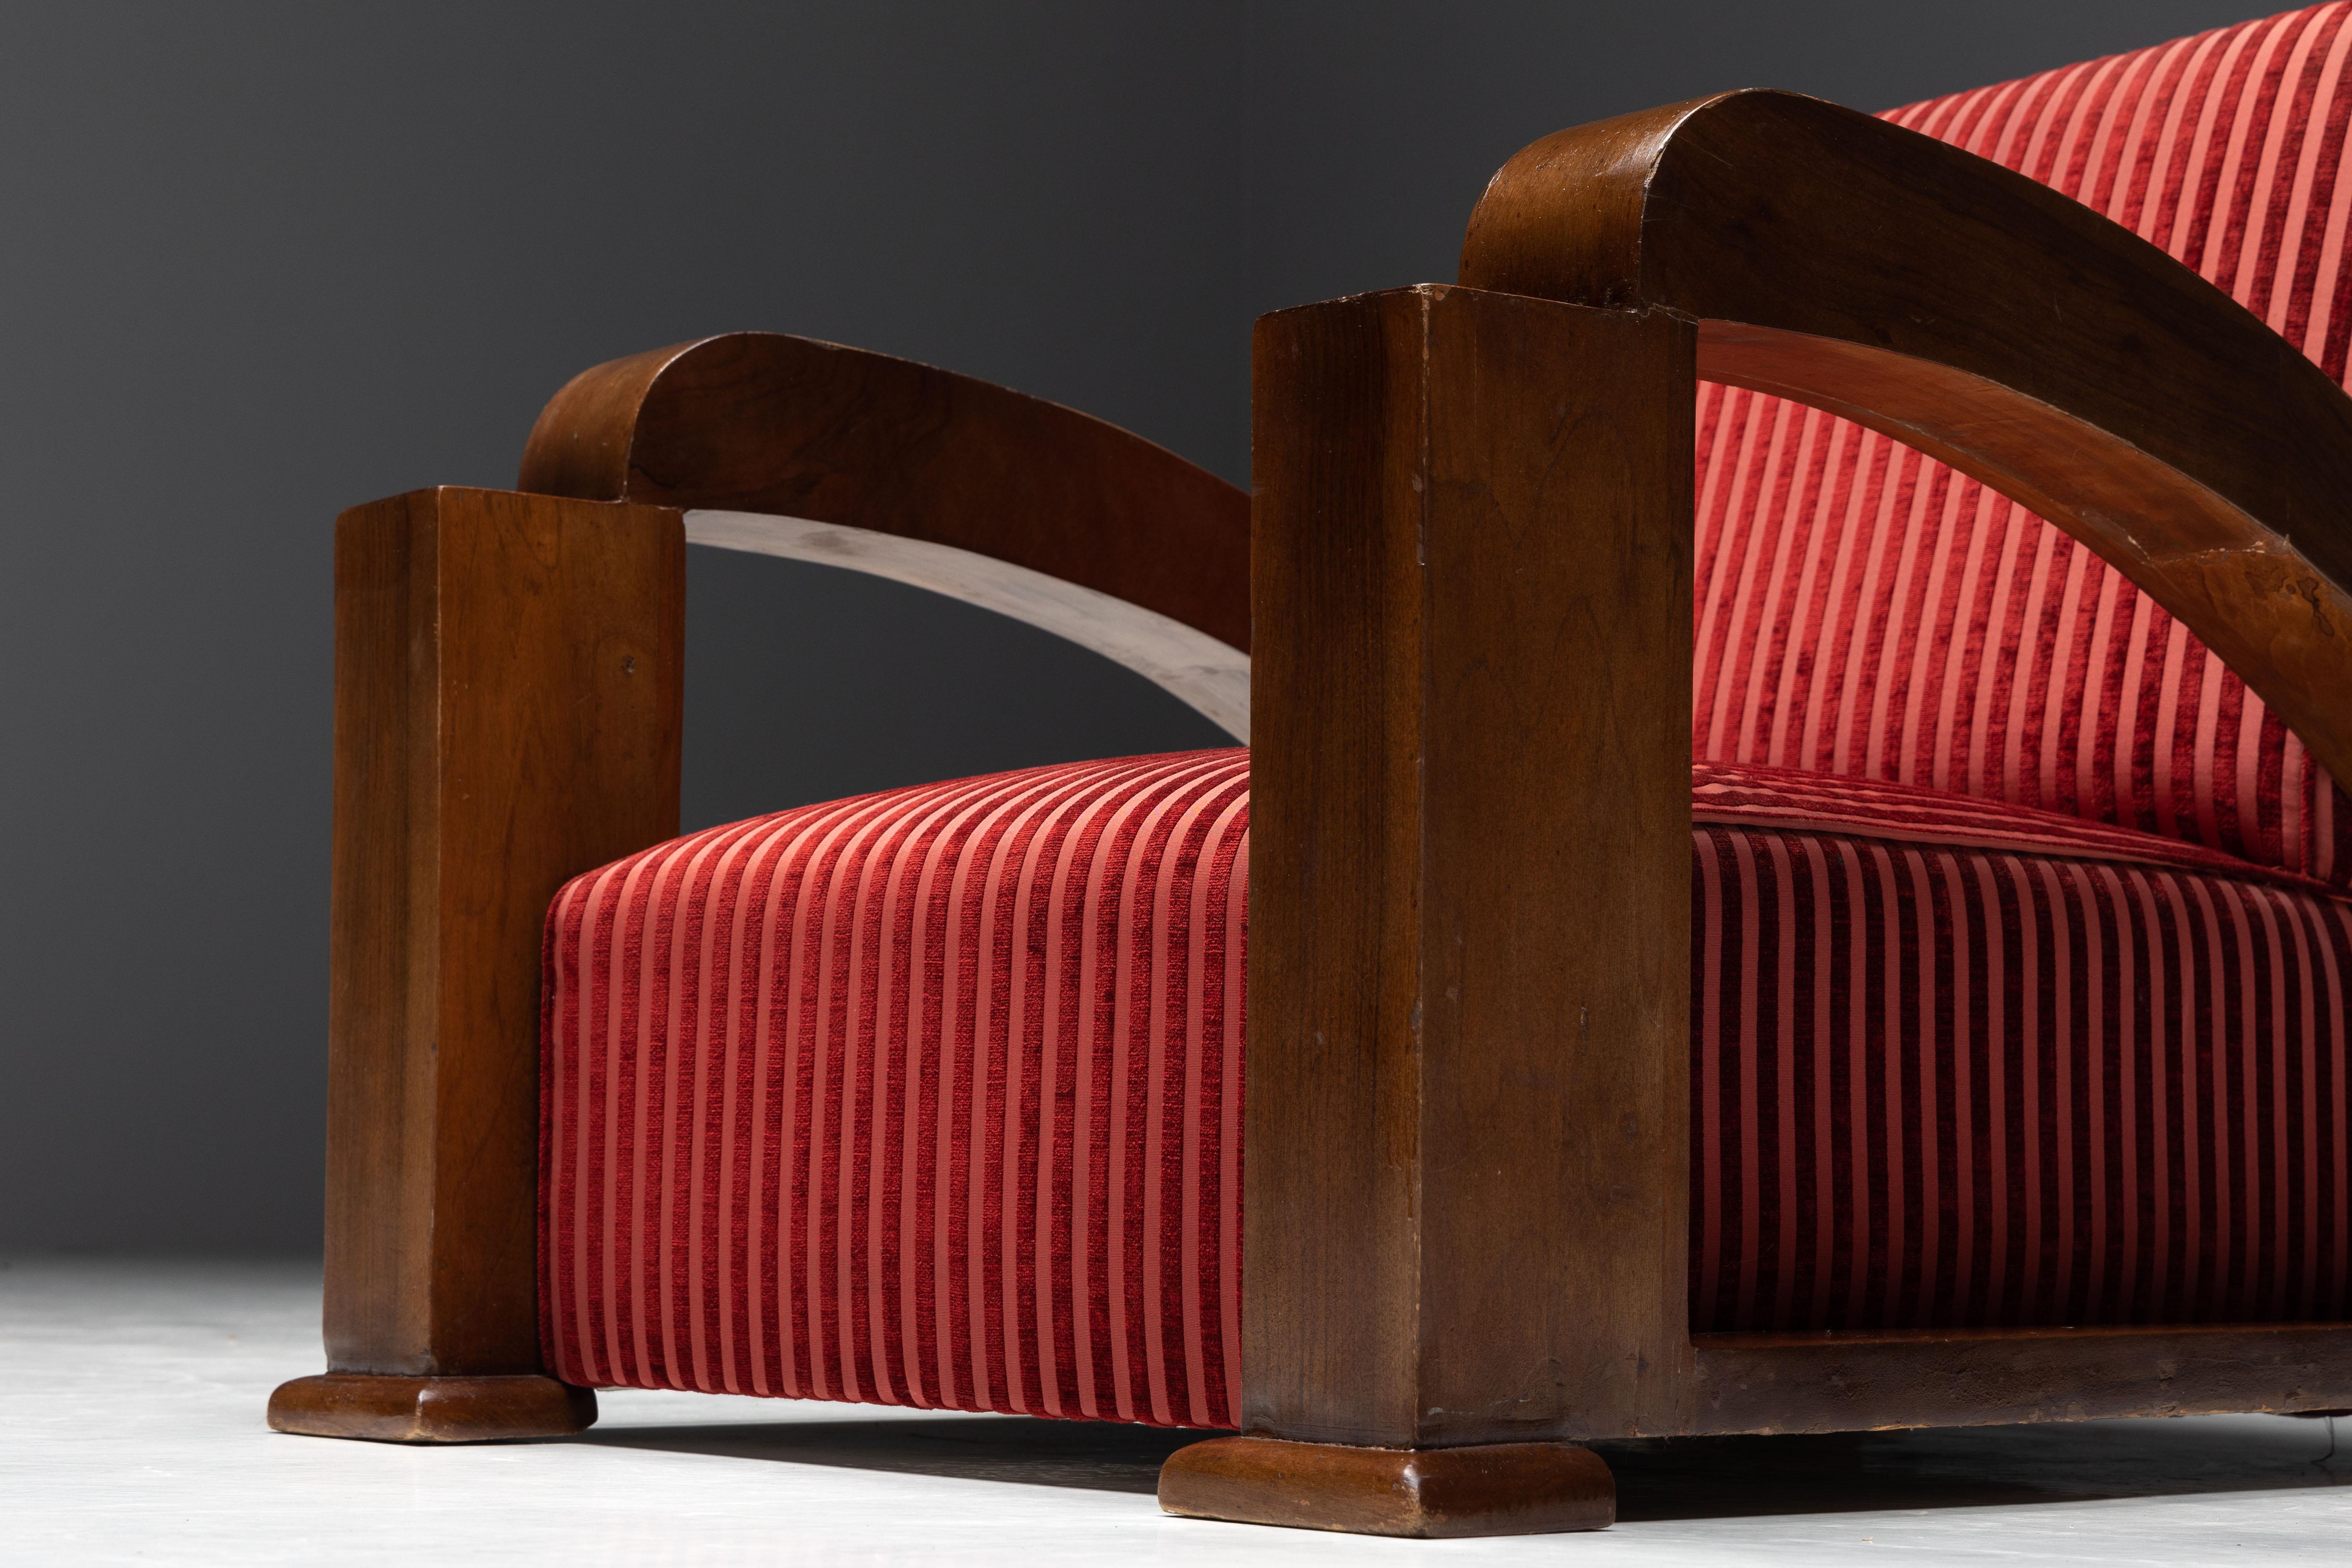 Art Deco Armchairs in Red Striped Velvet and with Swoosh Armrests, France, 1940s For Sale 3